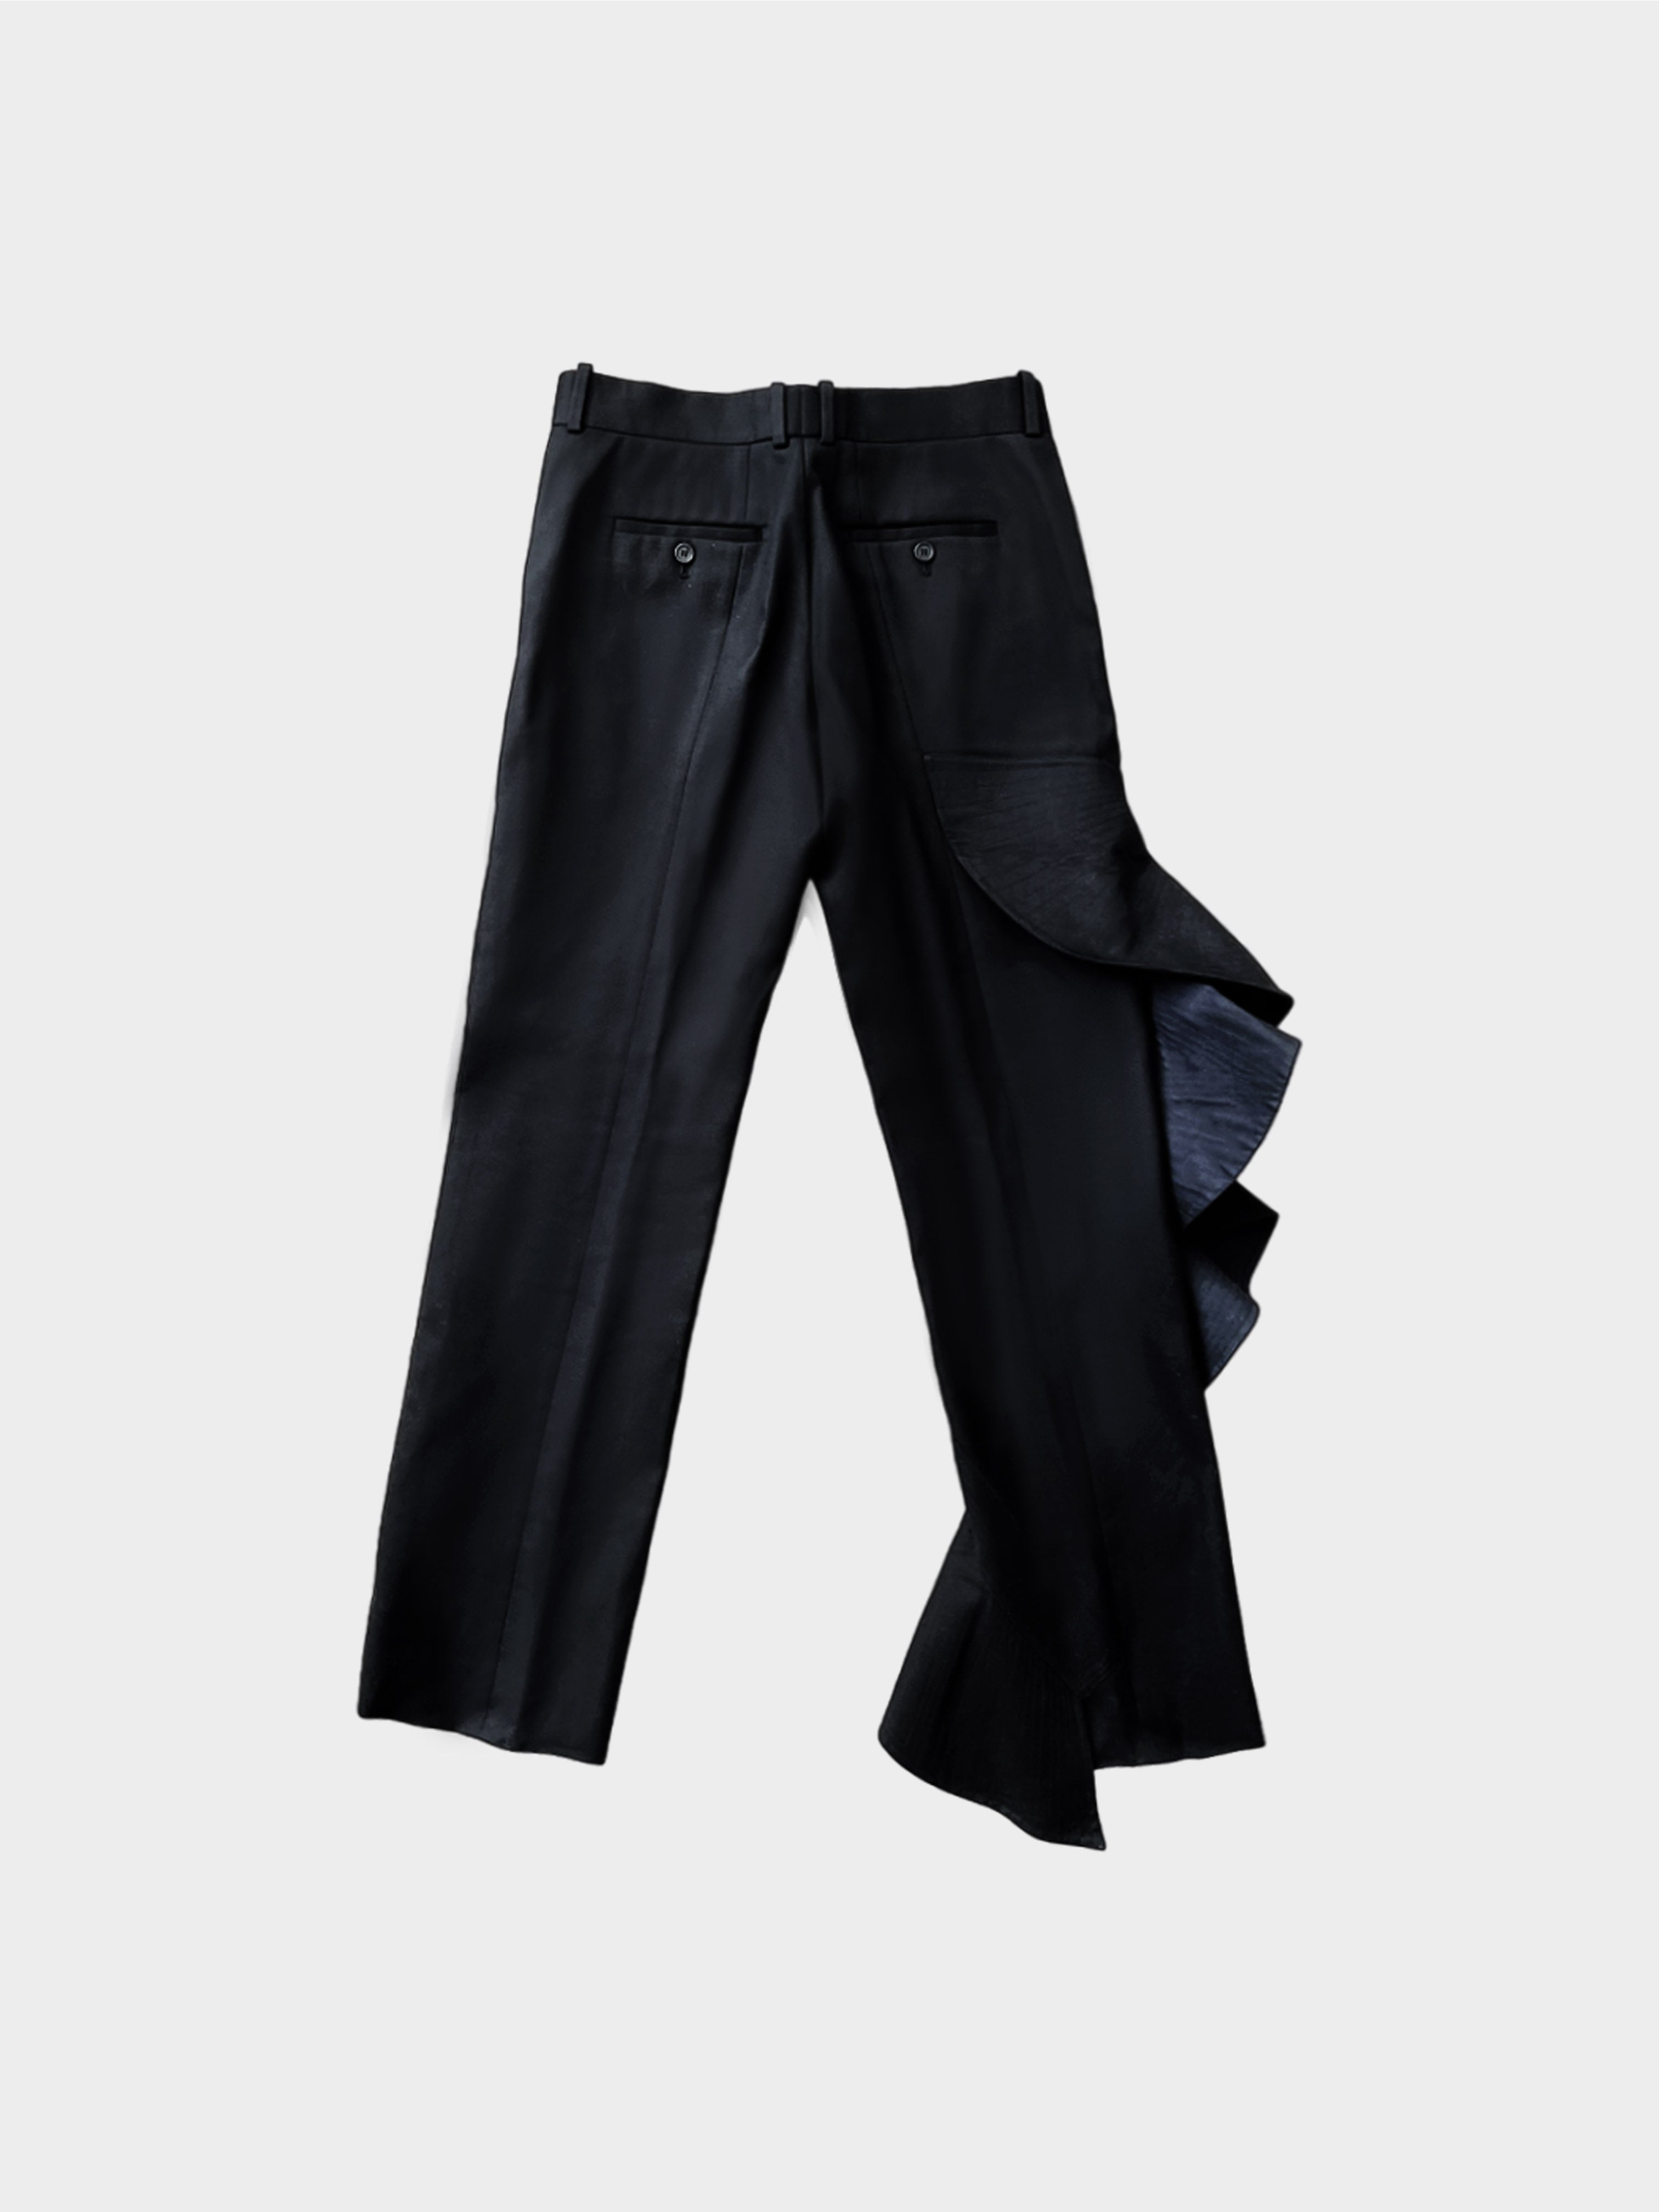 Céline by Phoebe Philo 2010s Ruffle Detail Trousers · INTO